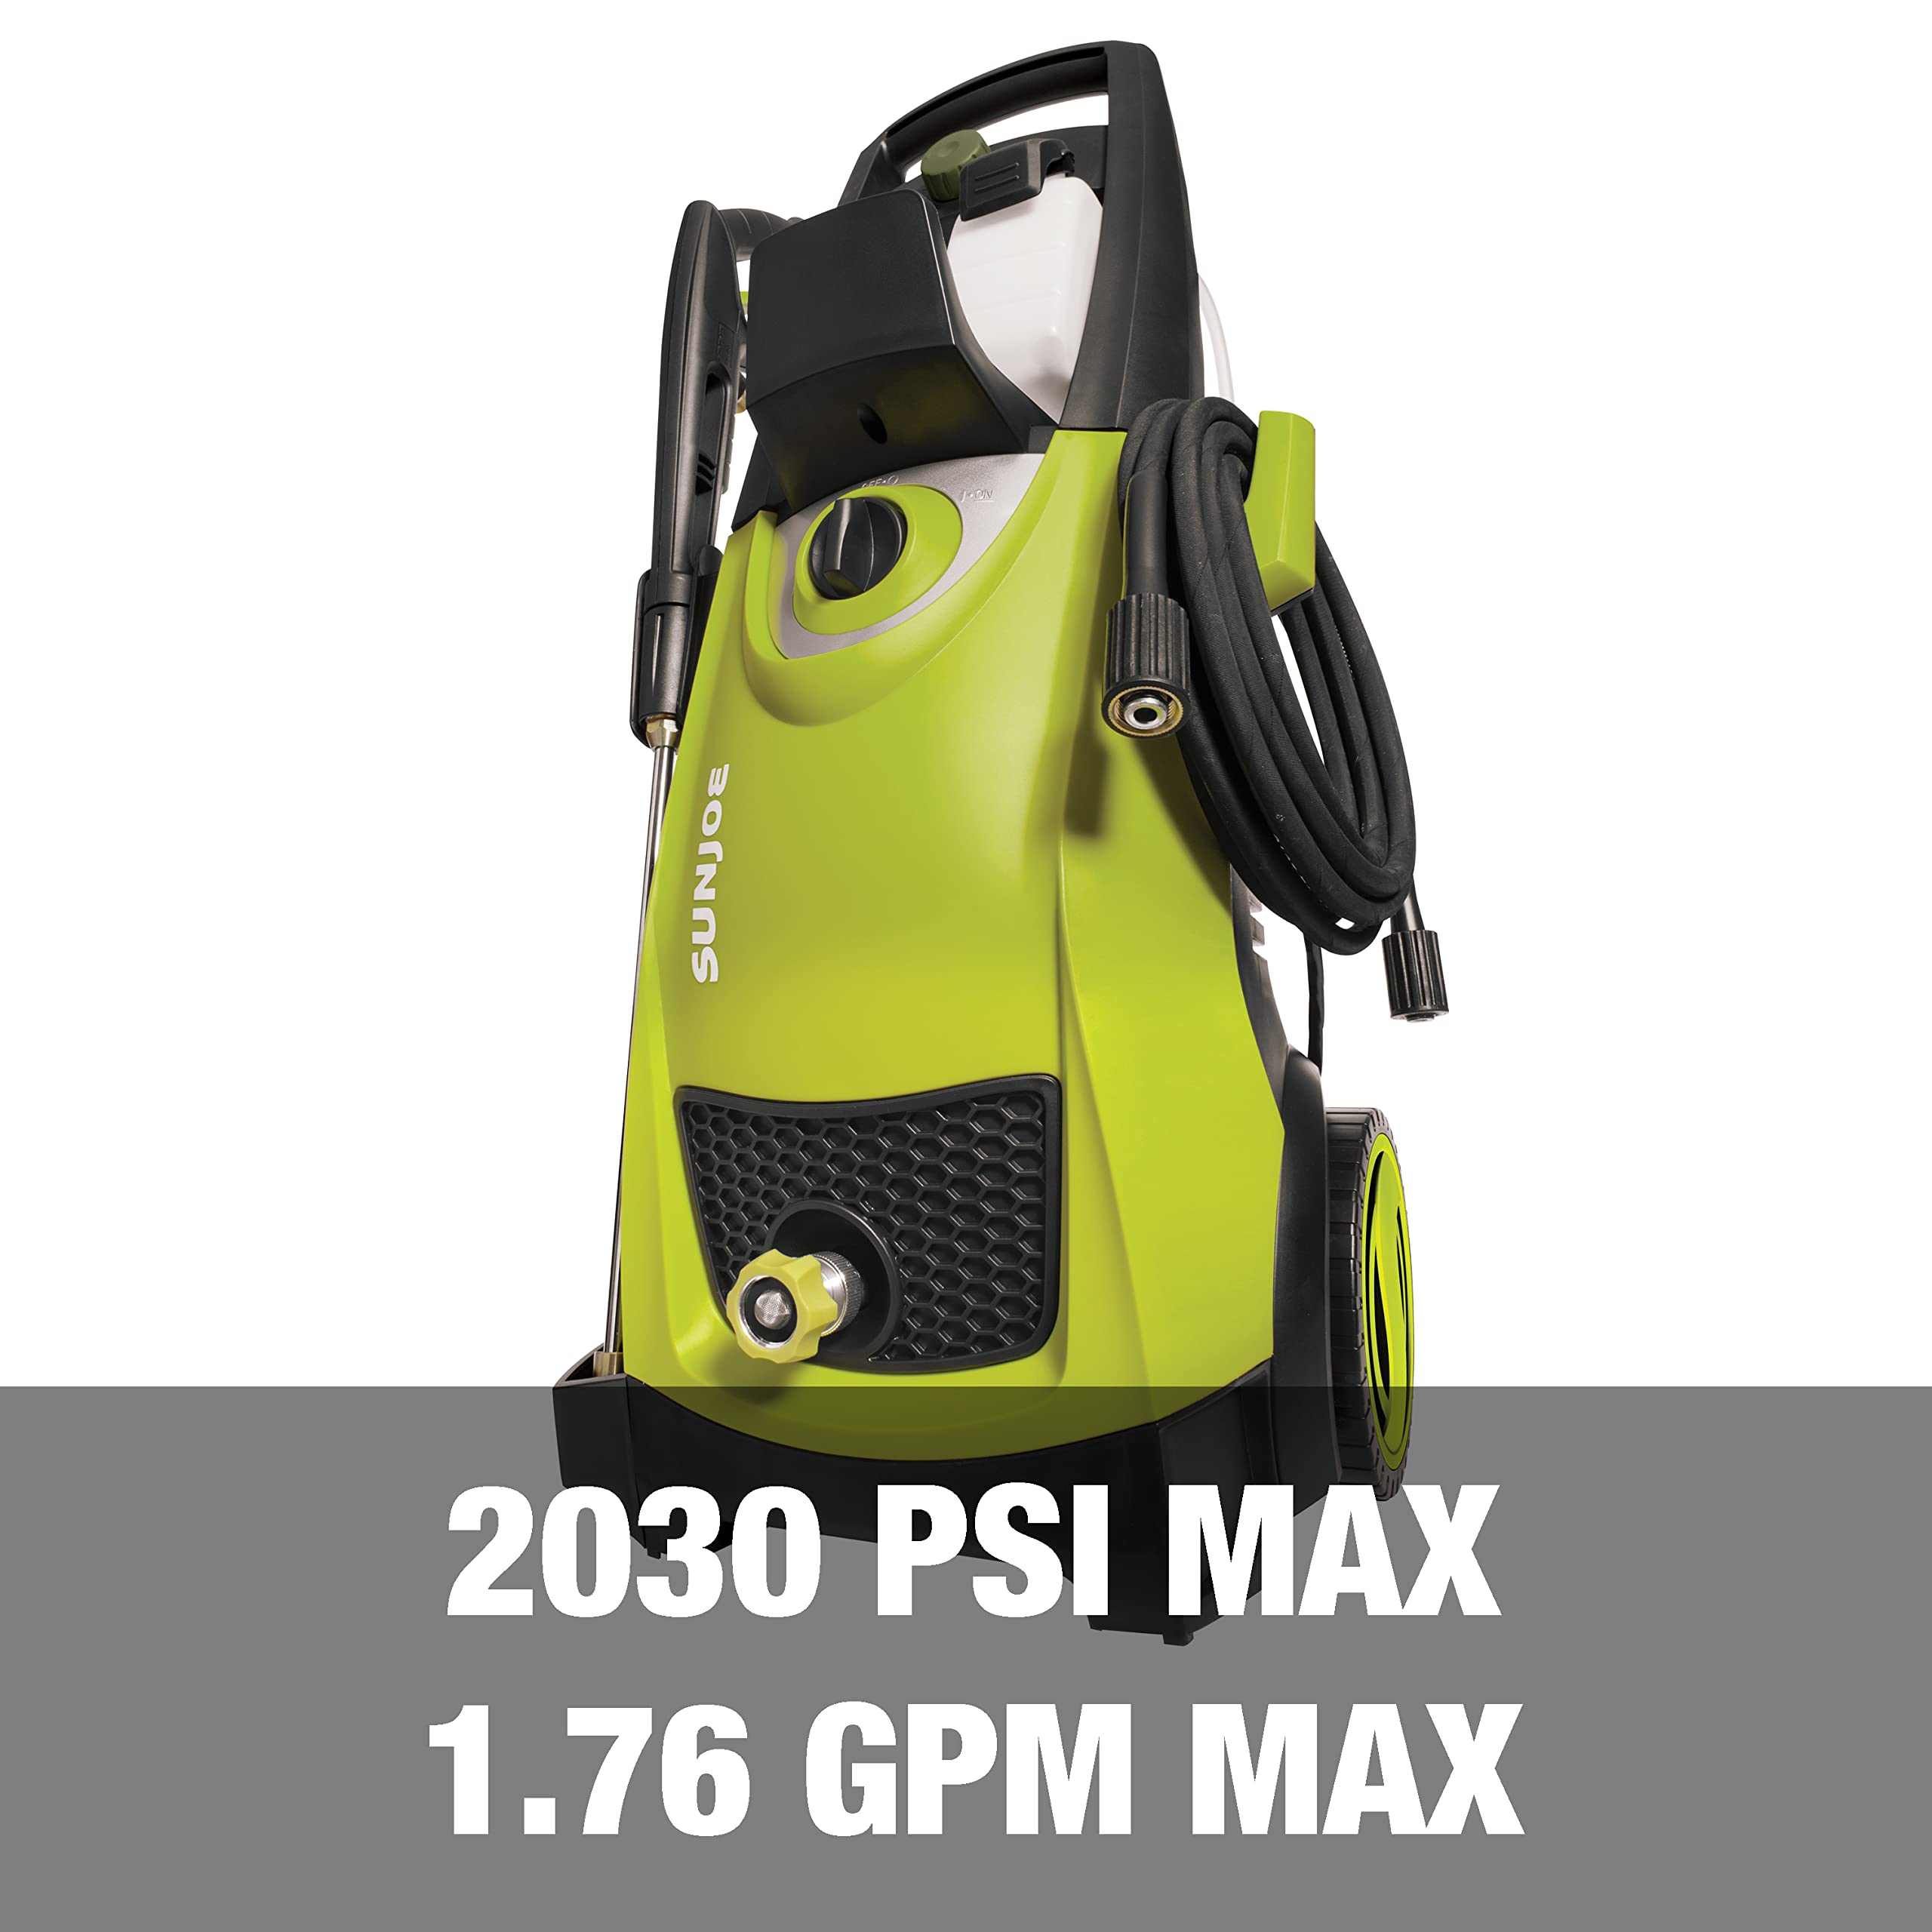 Sun Joe SPX3000 14.5-Amp Electric High Pressure Washer, Cleans Cars/Fences/Patios